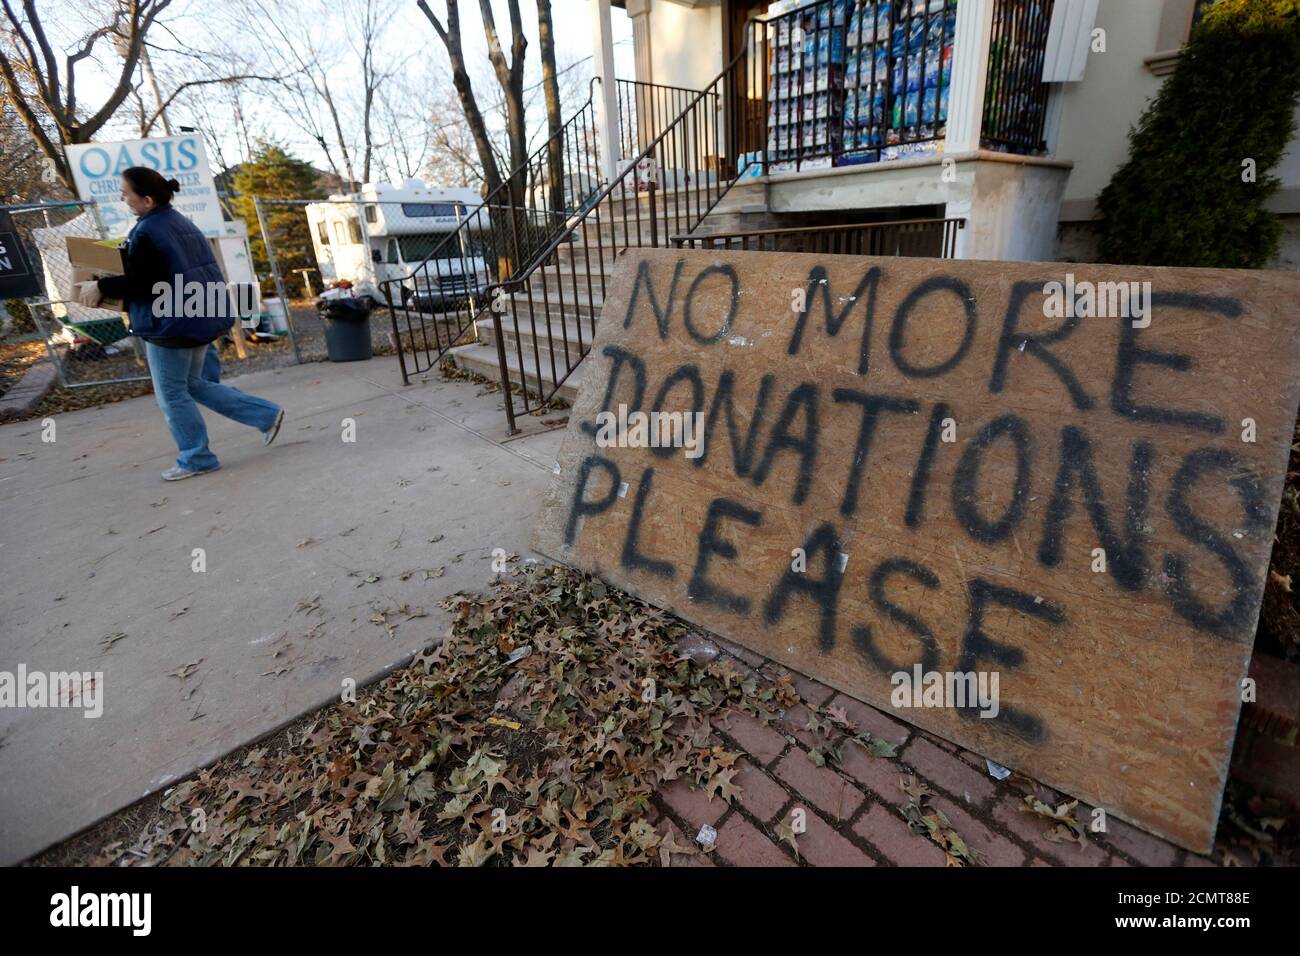 A sign reads 'No More Donations Please' is placed outside the Oasis Christian Center in the Midland Beach area of Staten Island, New York, November 14, 2012. The Oasis Christian Center despite having been flooded and damaged in the superstorm has become a center of donations and aid for the surrounding neighborhood. The federal government's flood insurance program may not have access to enough funds to cover anticipated claims from Hurricane Sandy victims, a top official at the Federal Emergency Management Agency said on Thursday.   REUTERS/Brendan McDermid (UNITED STATES  - Tags: DISASTER ENV Stock Photo